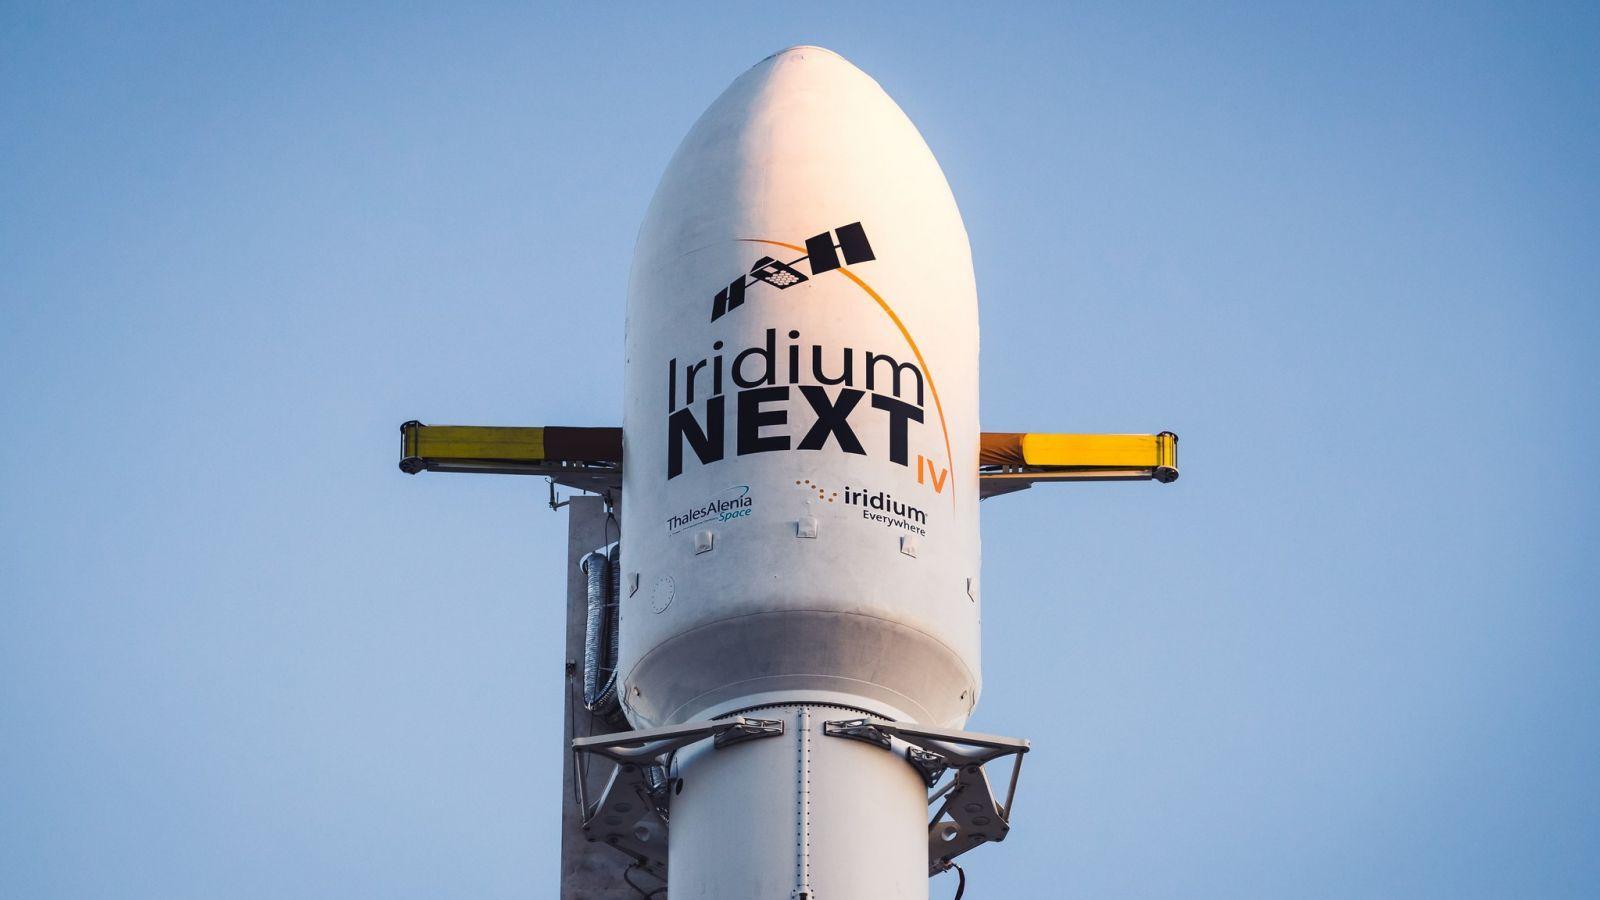 10 Mission SpaceX Logo - SpaceX readies Falcon 9 for launch with 10 Iridium NEXT satellites